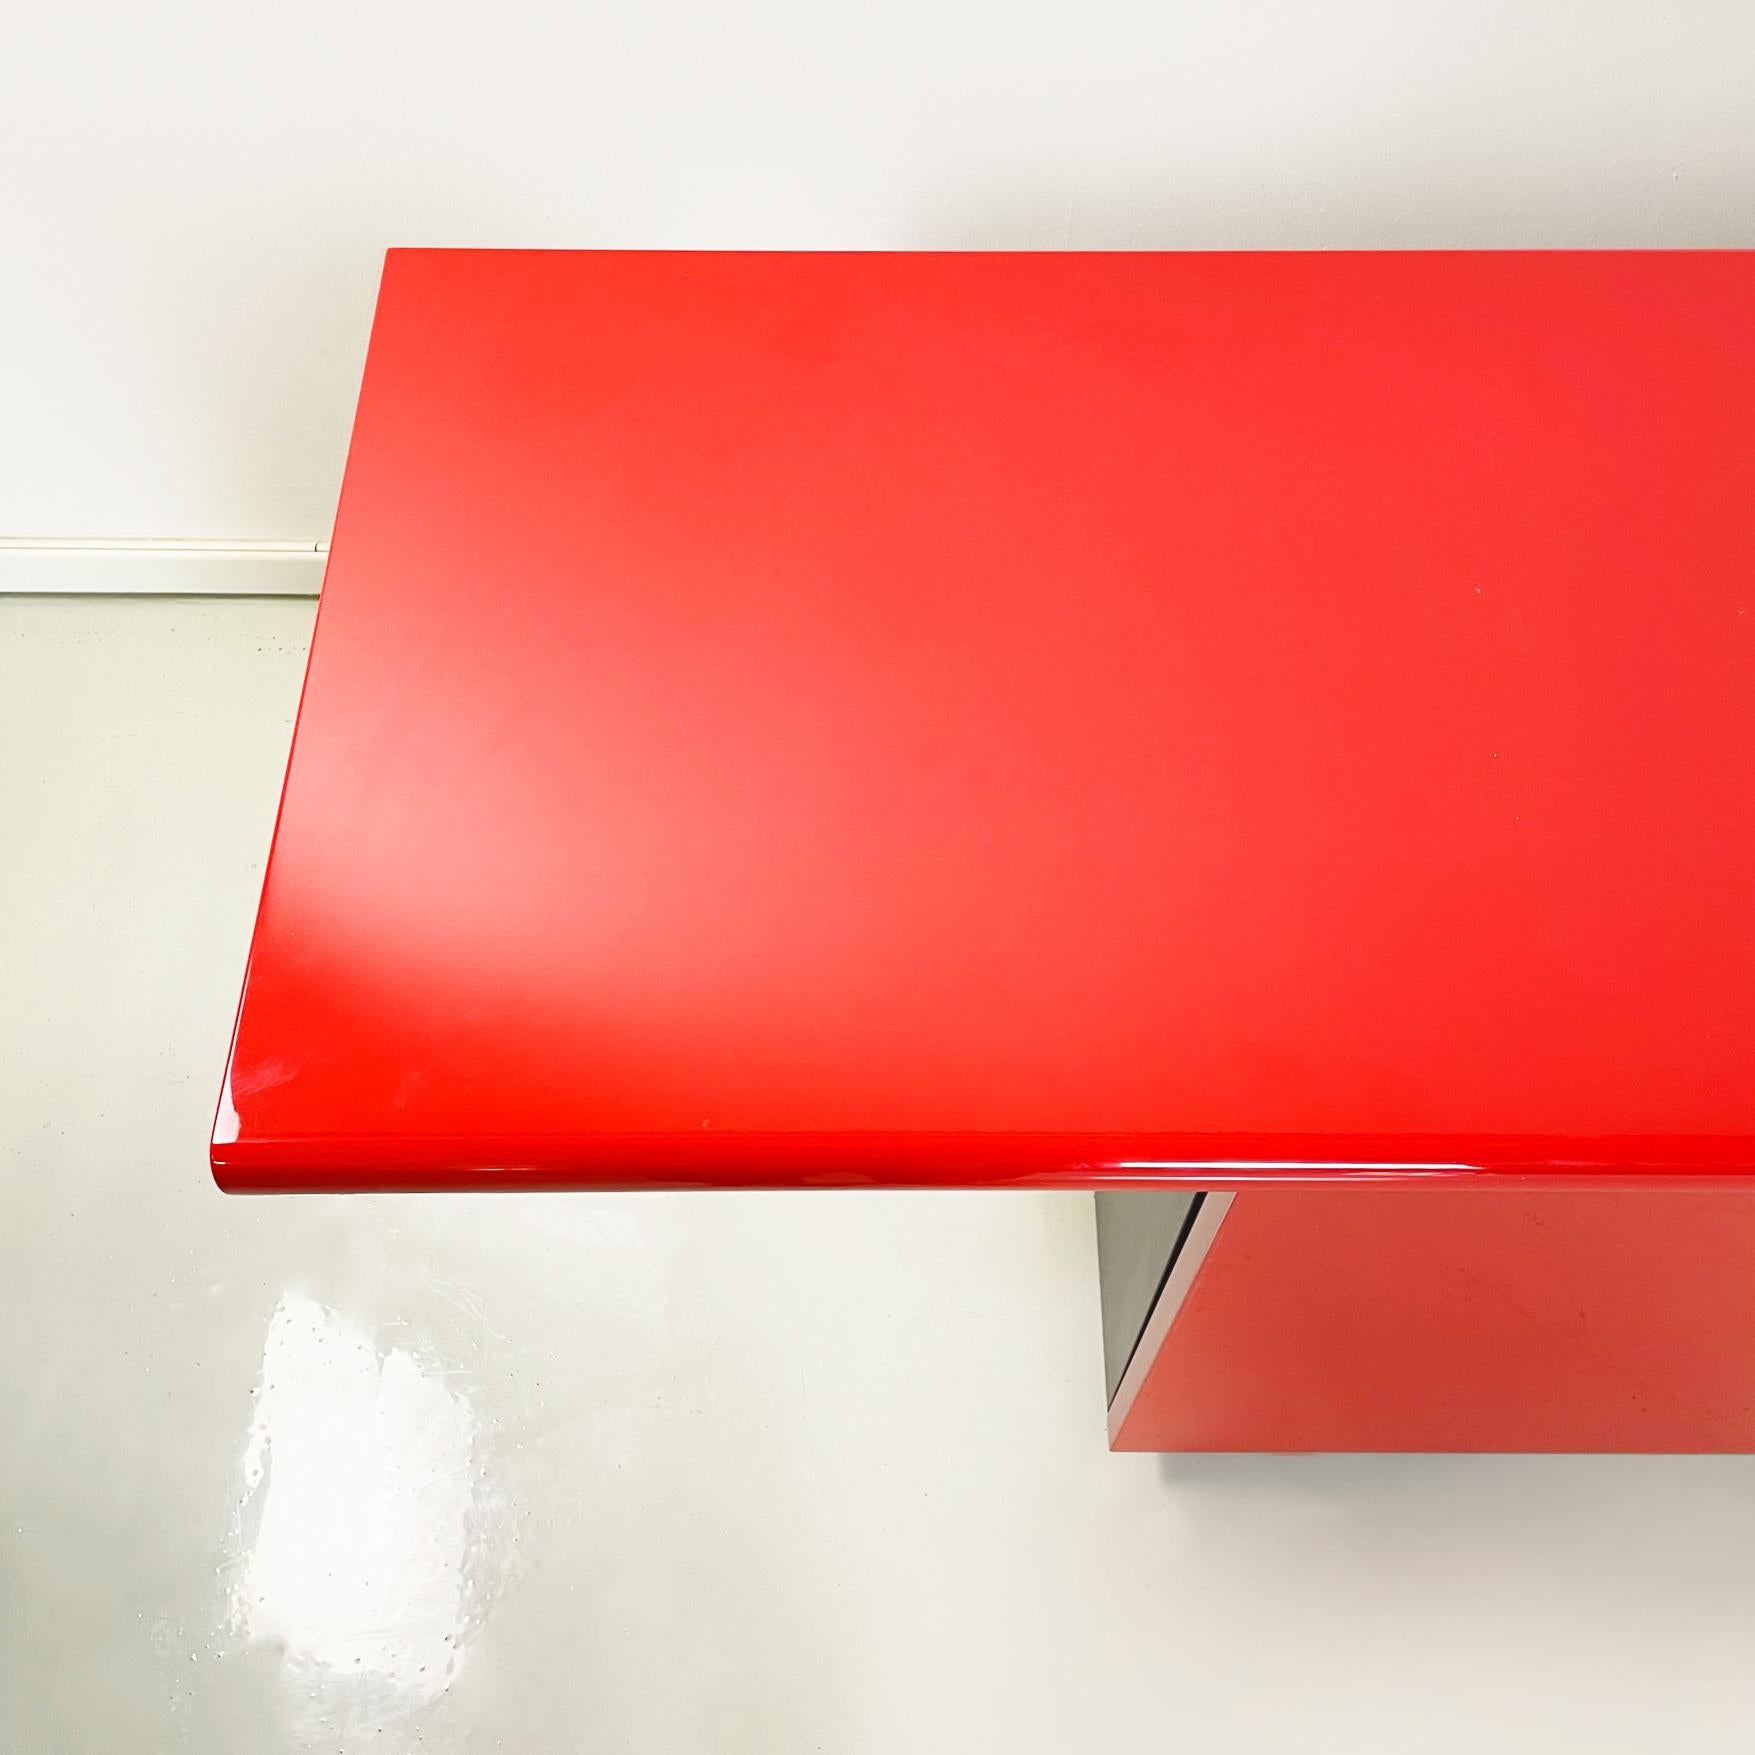 Italian Modern Red Sideboard Sheraton by Stoppino and Acerbis for Acerbis, 1977 For Sale 2